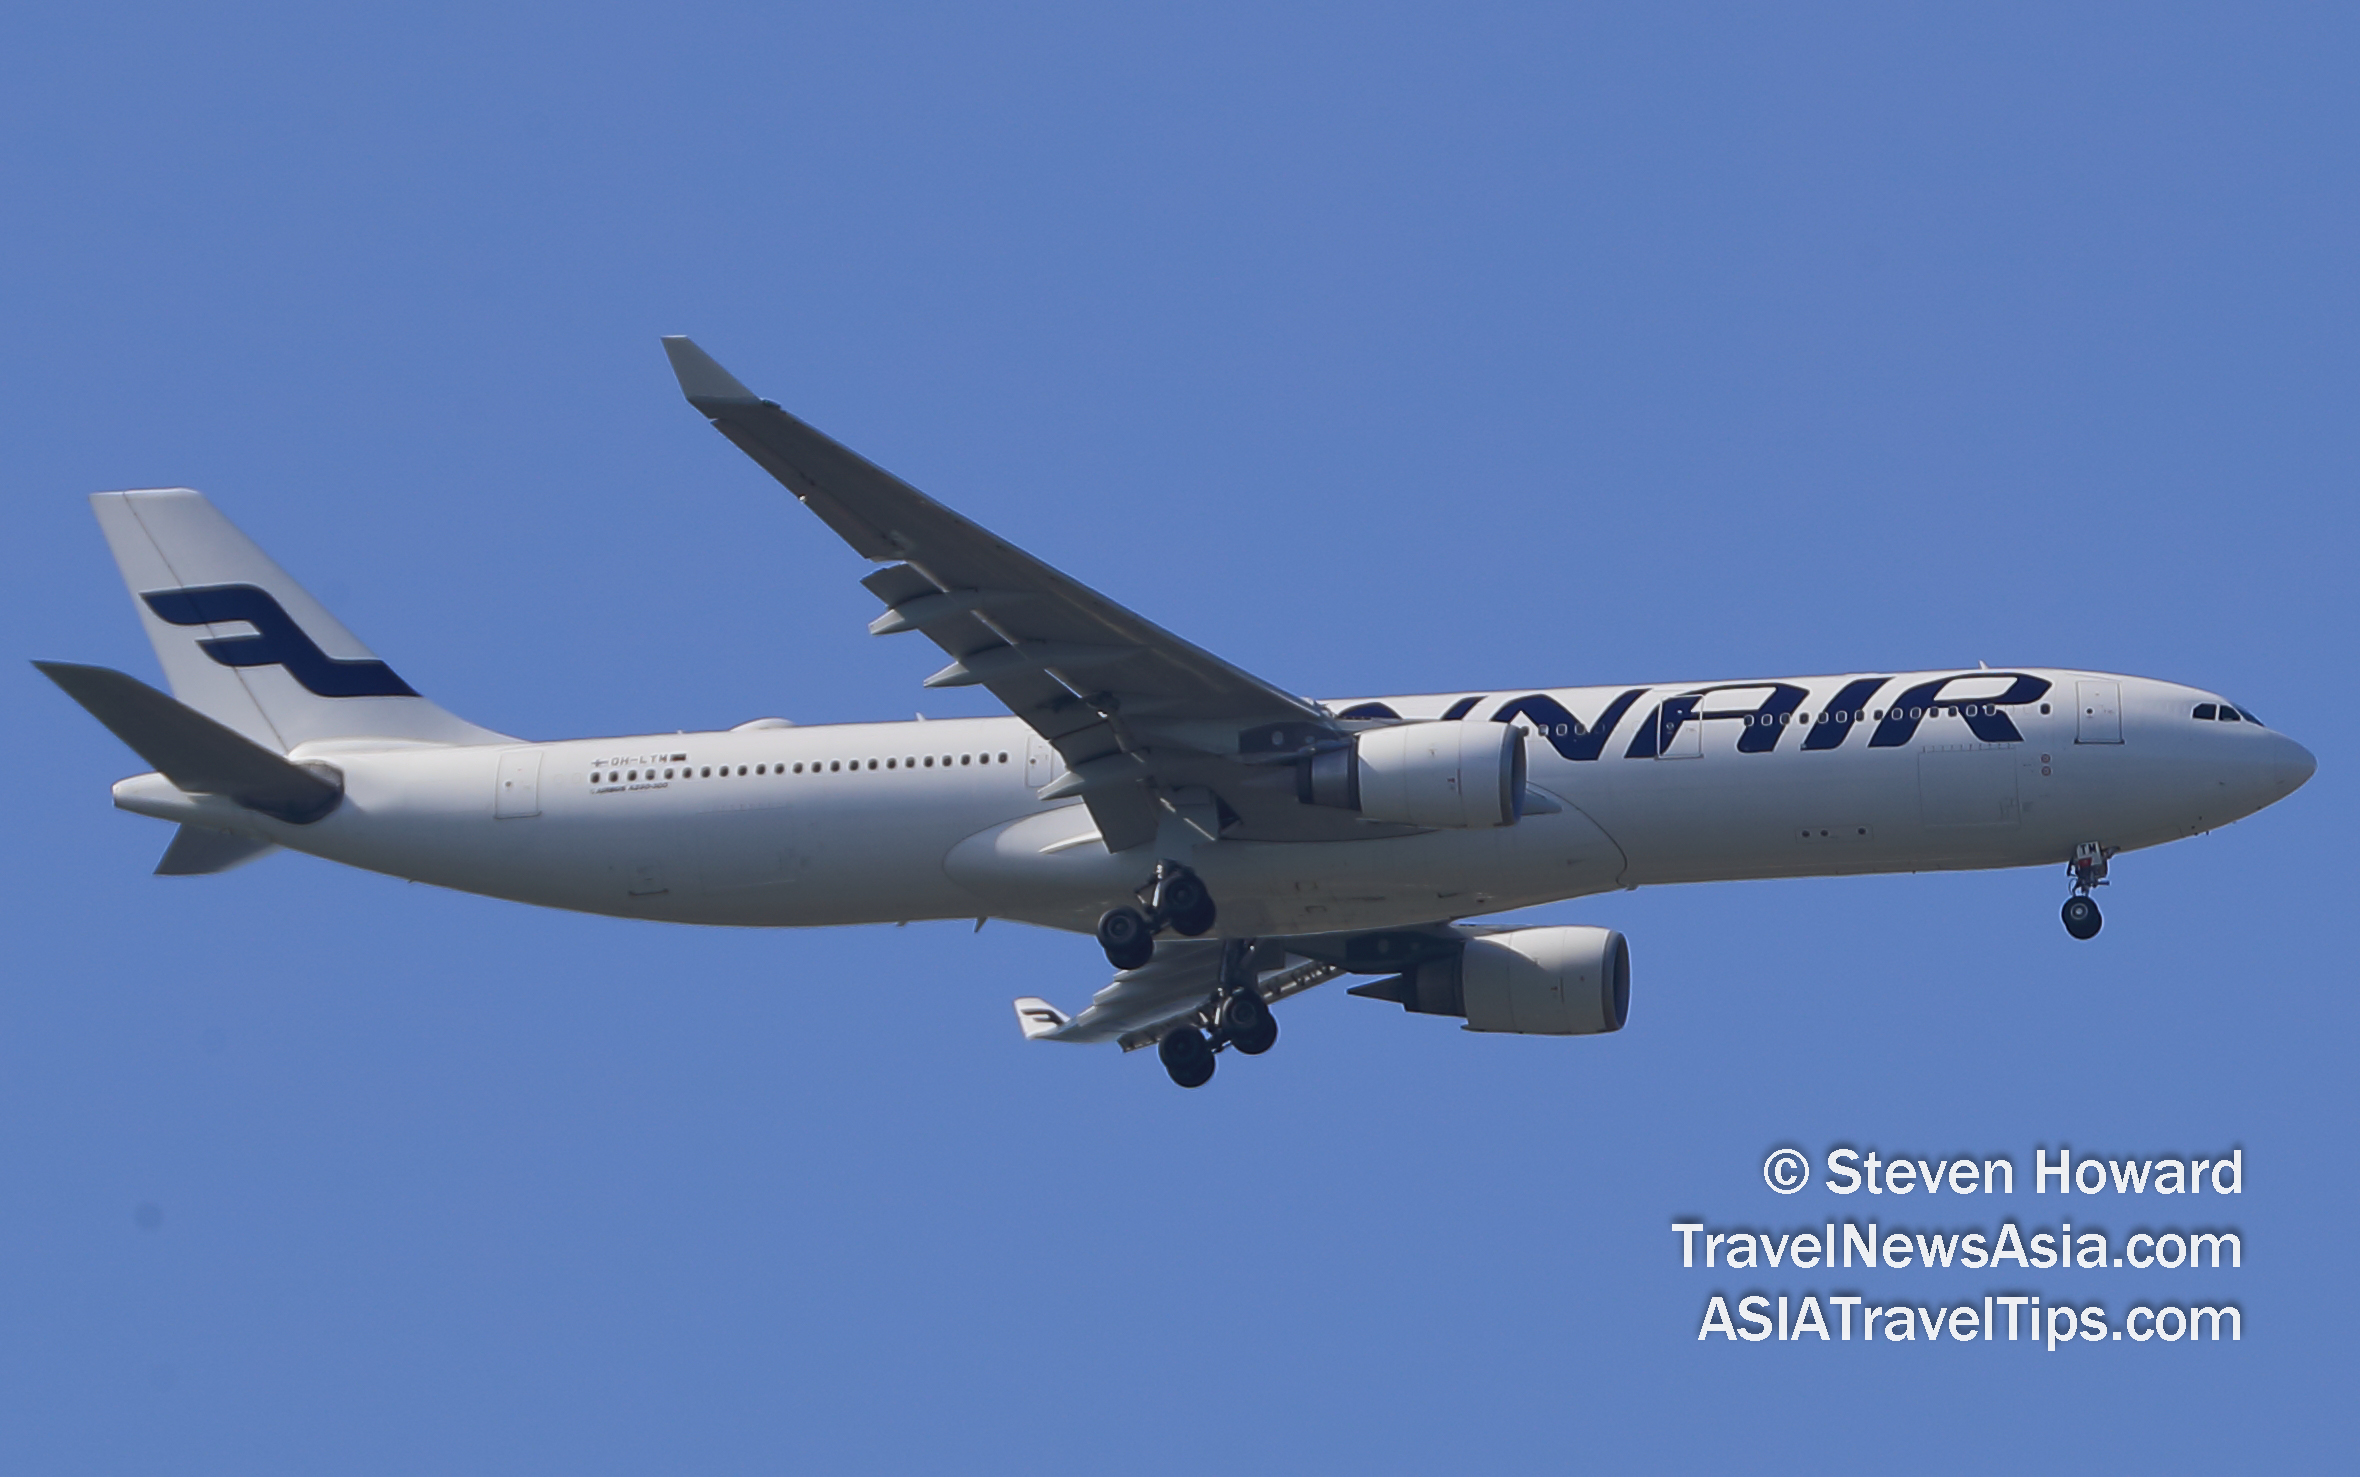 Finnair Airbus A330-300 reg: OH-LTM on 27 June 2019. Picture by Steven Howard of TravelNewsAsia.com Click to enlarge.